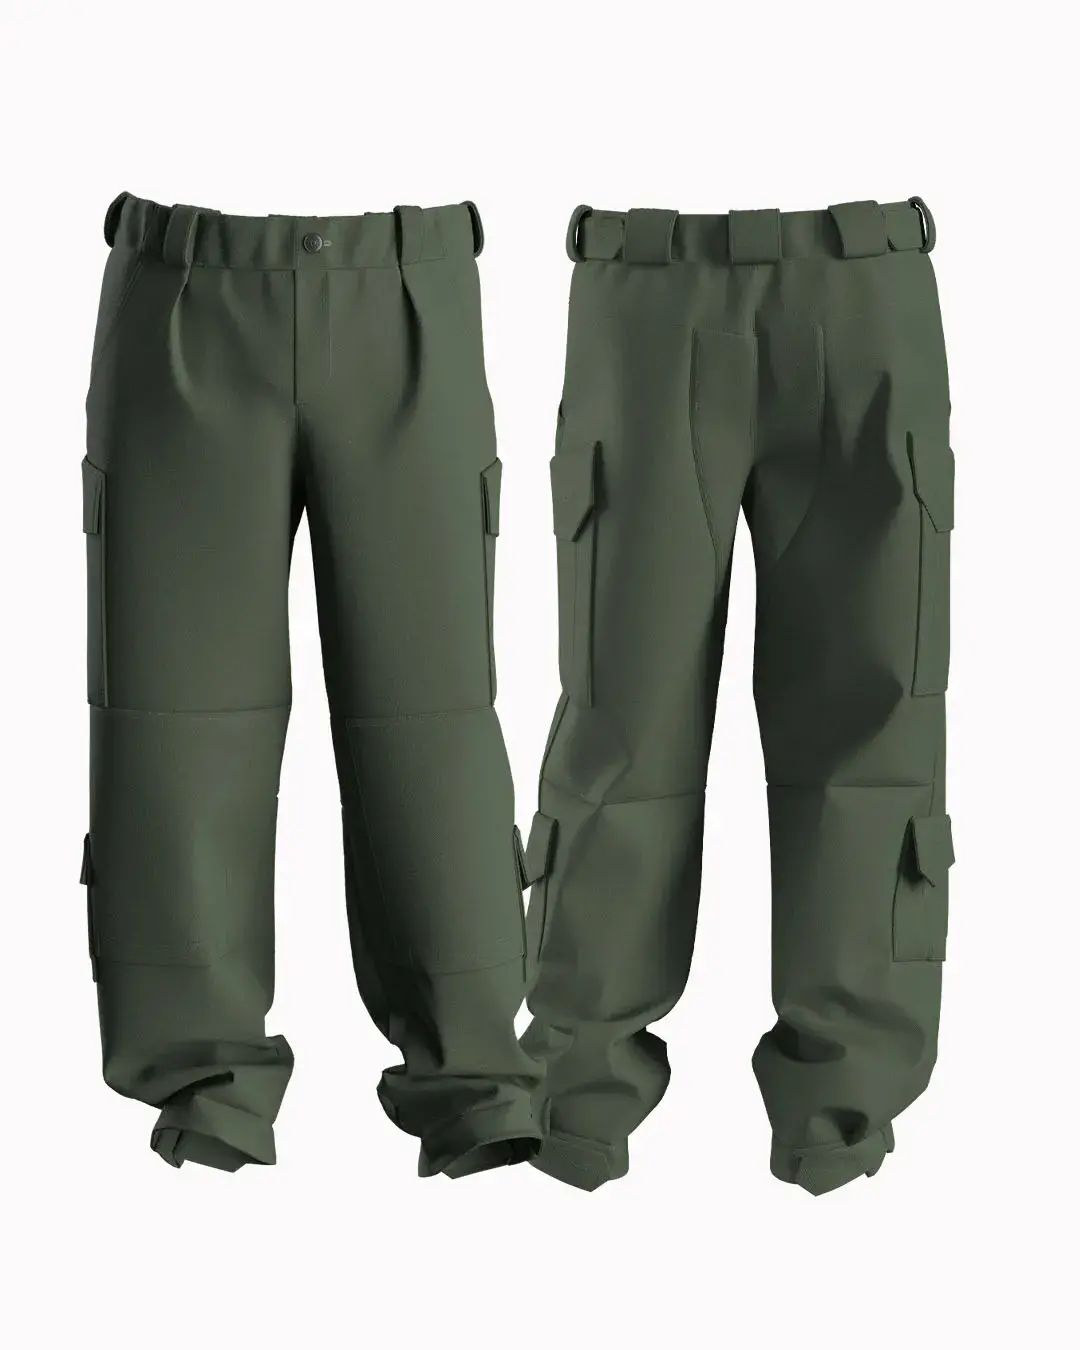 Pants from the summer field uniform